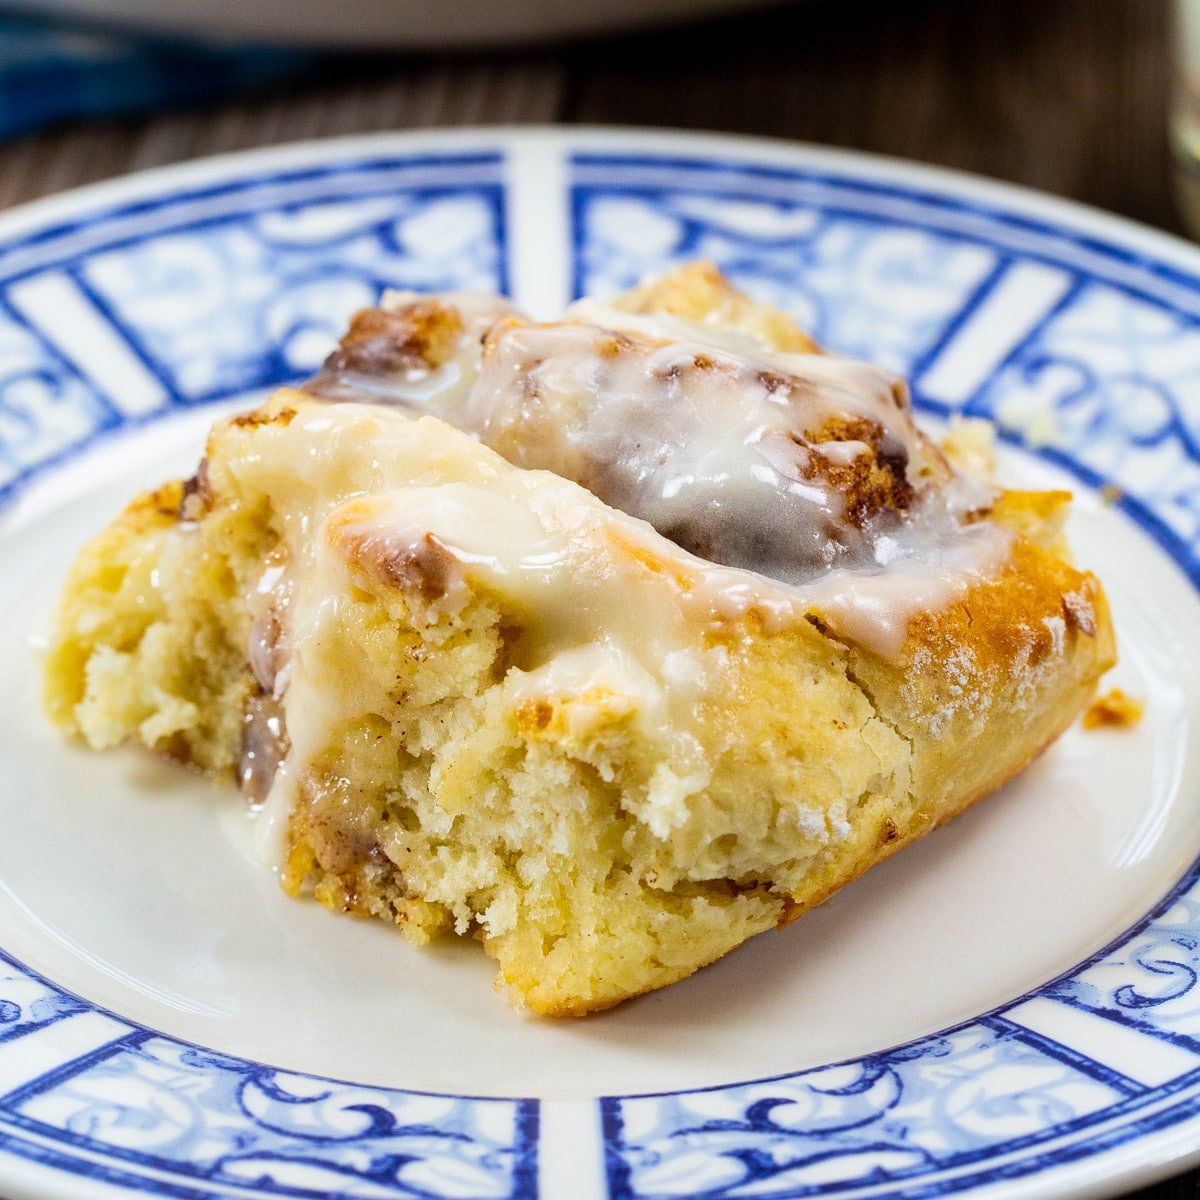 Bisquick Cinnamon Roll on a blue and white plate.